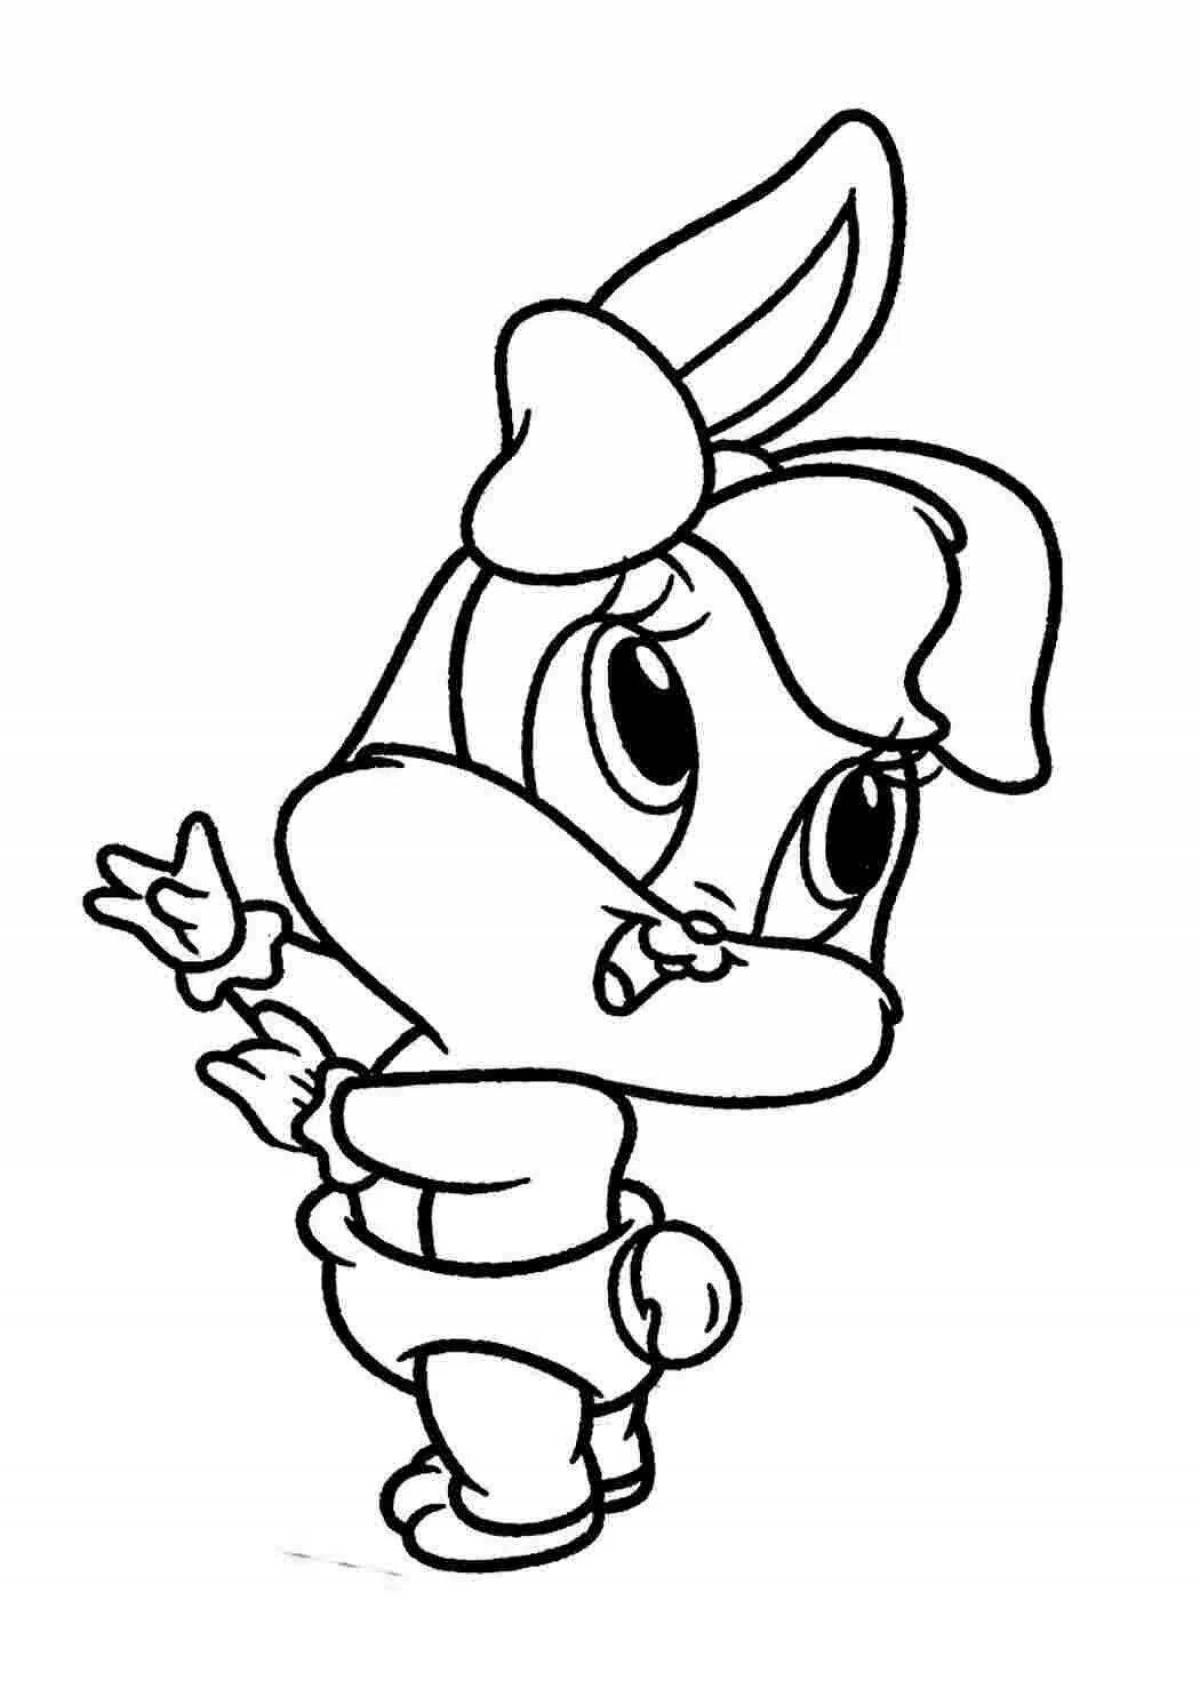 Violent hare coloring pages for girls